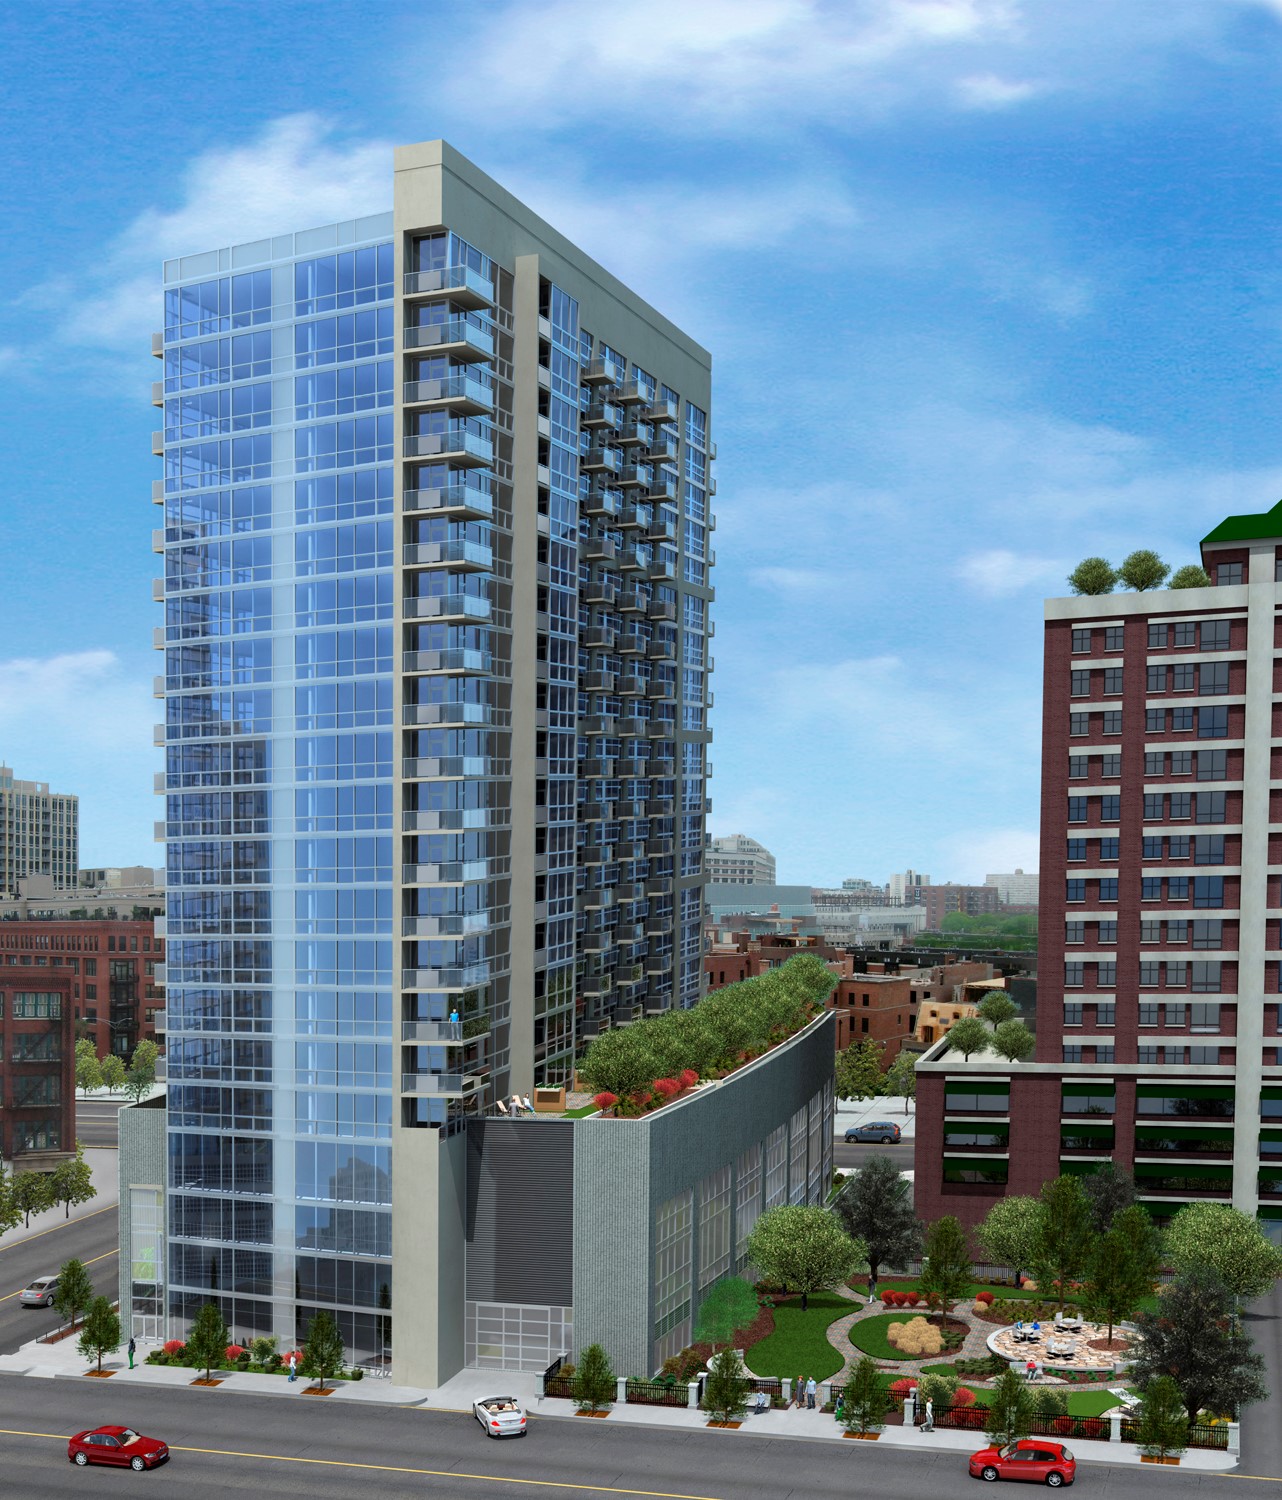 New construction 21-story multi-use reinforced concrete apartment tower with enclosed ramped parking on floor 1-4. The building features a generous entry lobby and many amenities including private storage spaces, large community room, outdoor terrace, and a health spa.